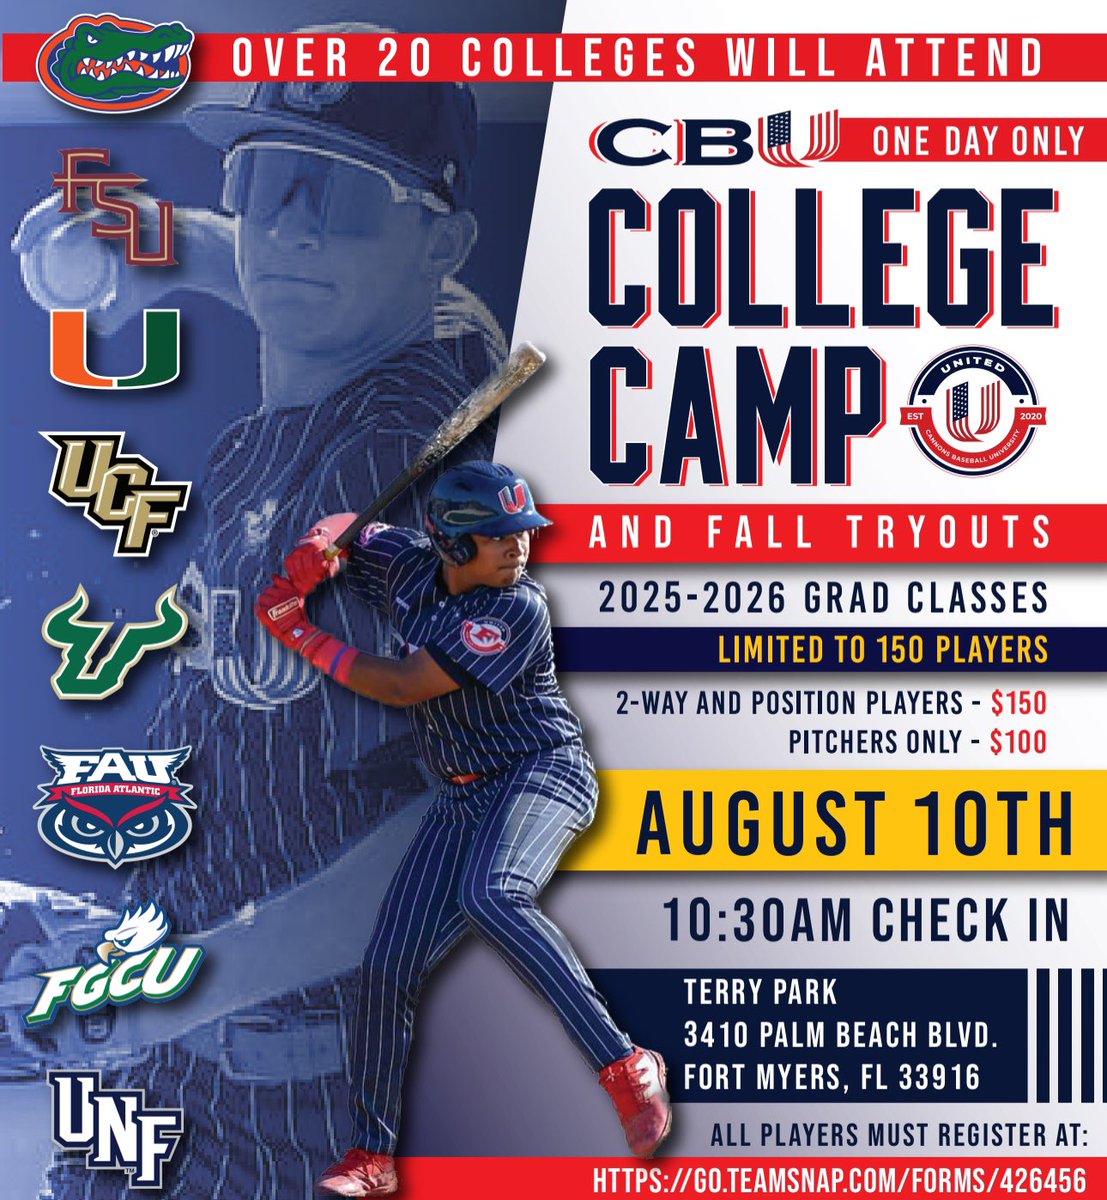 🚨 OPEN COLLEGE CAMP 🚨 THE CAMP IS OPEN TO THE PUBLIC, YOU DO NOT HAVE TO PLAY FOR @cbu_fl TO ATTEND… Space at this point is extremely limited with only 11 spots currently left .Over 20 schools attend annually. Register at: go.teamsnap.com/forms/426456 #redhatnation